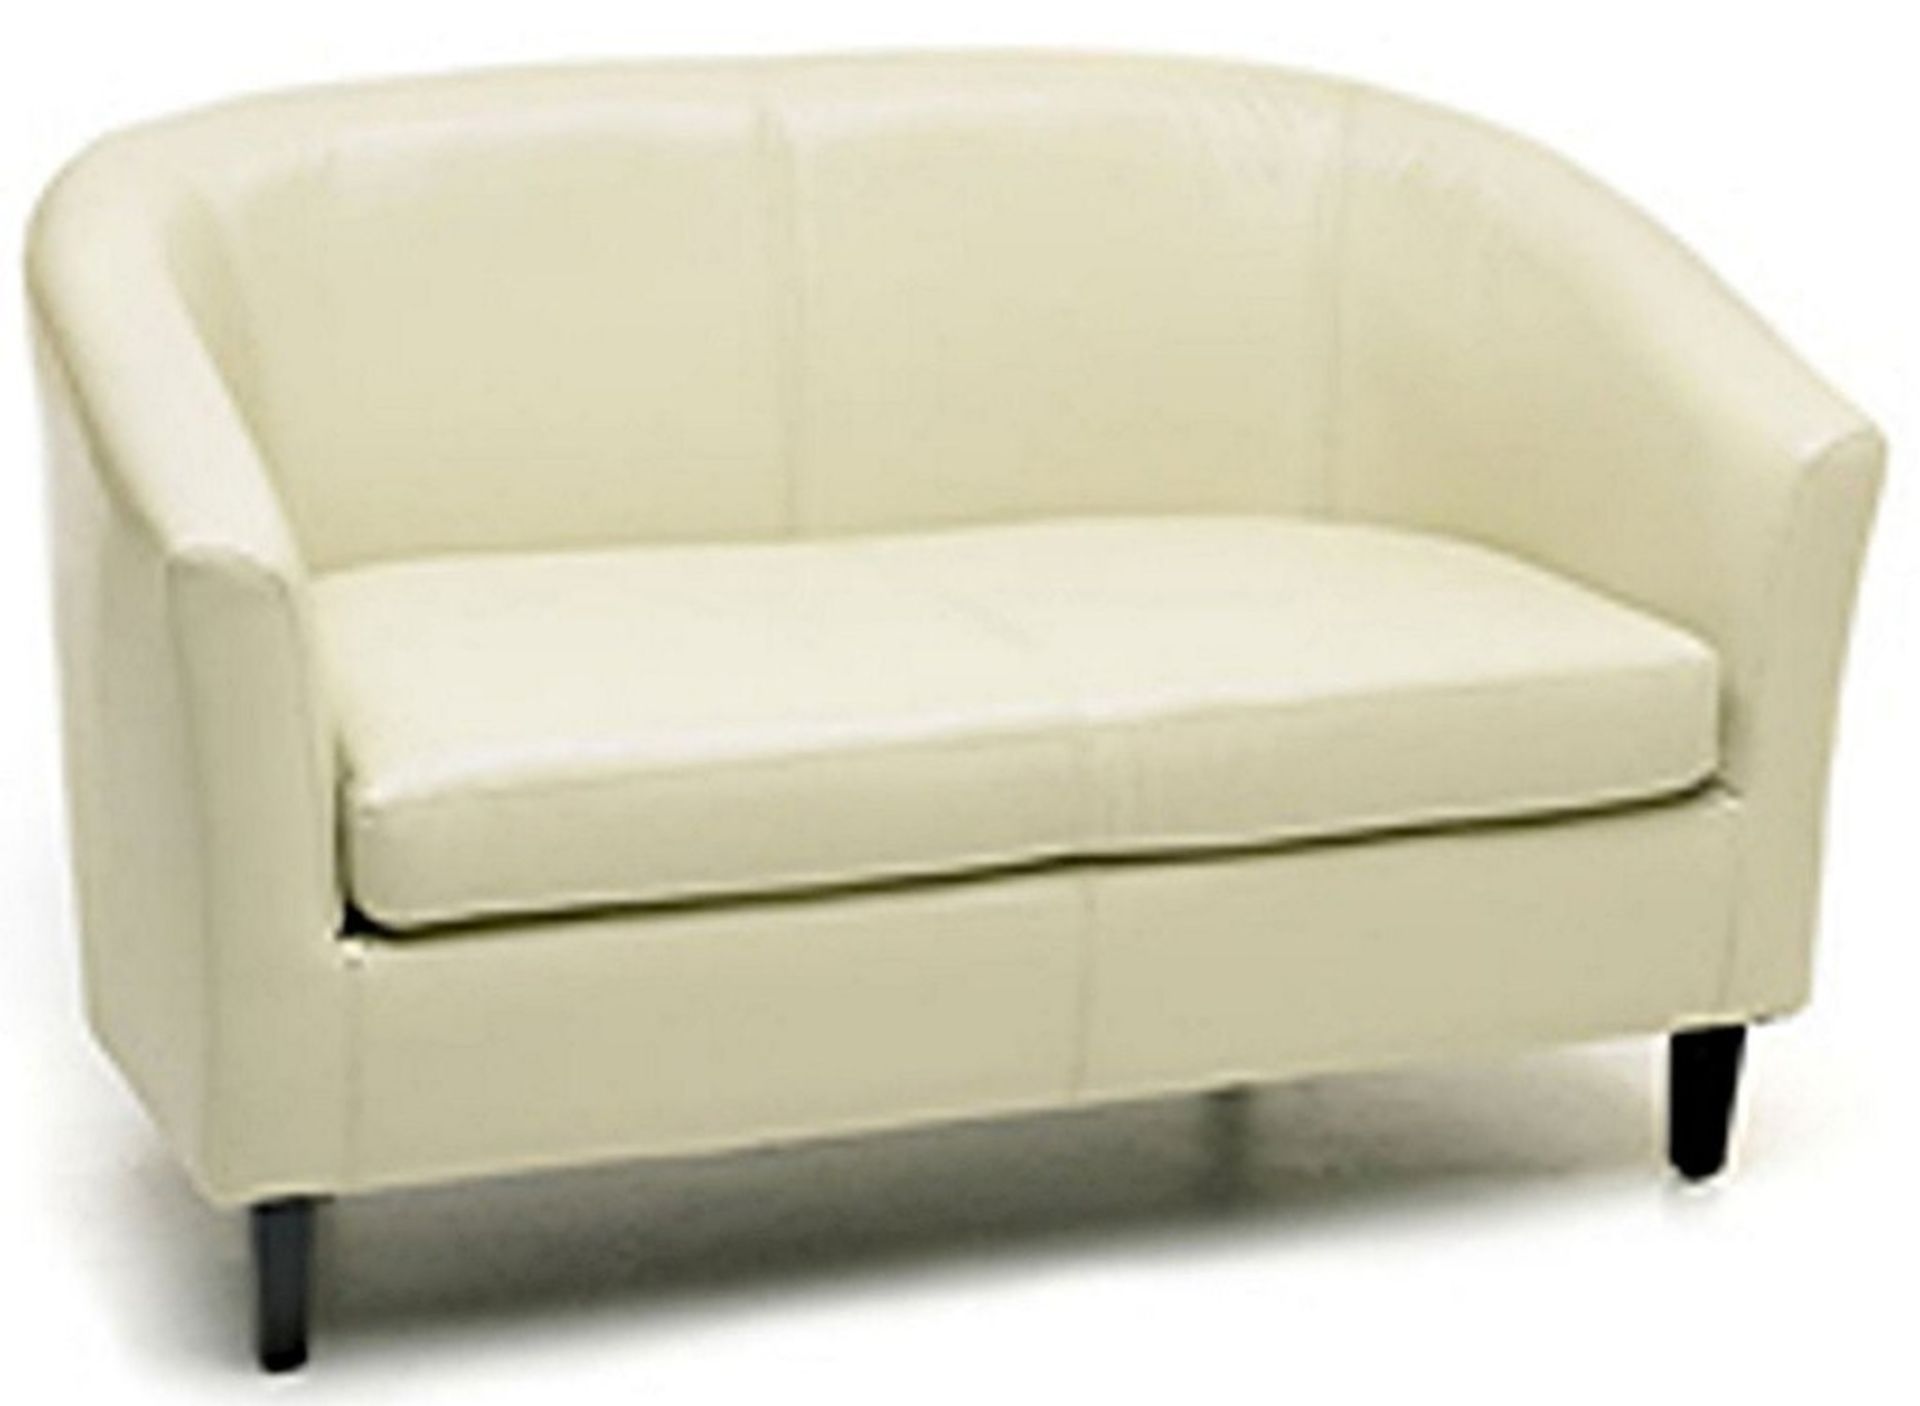 Brand new boxed direct from the manufacturers, Cream faux leather 2 seater tub sofa with dark brow